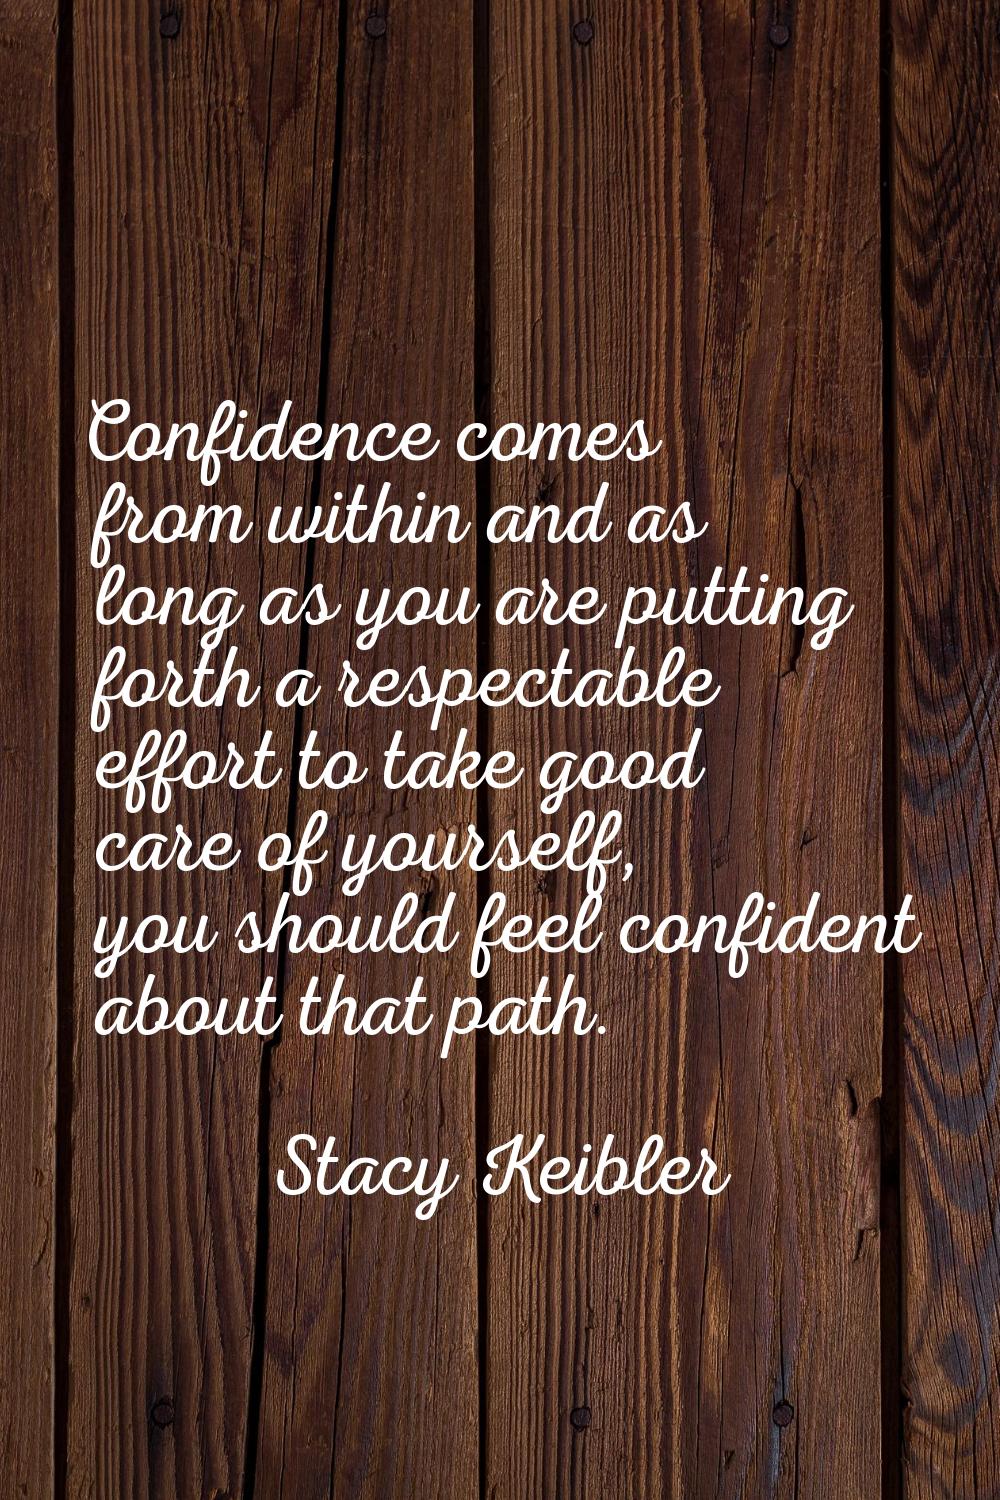 Confidence comes from within and as long as you are putting forth a respectable effort to take good